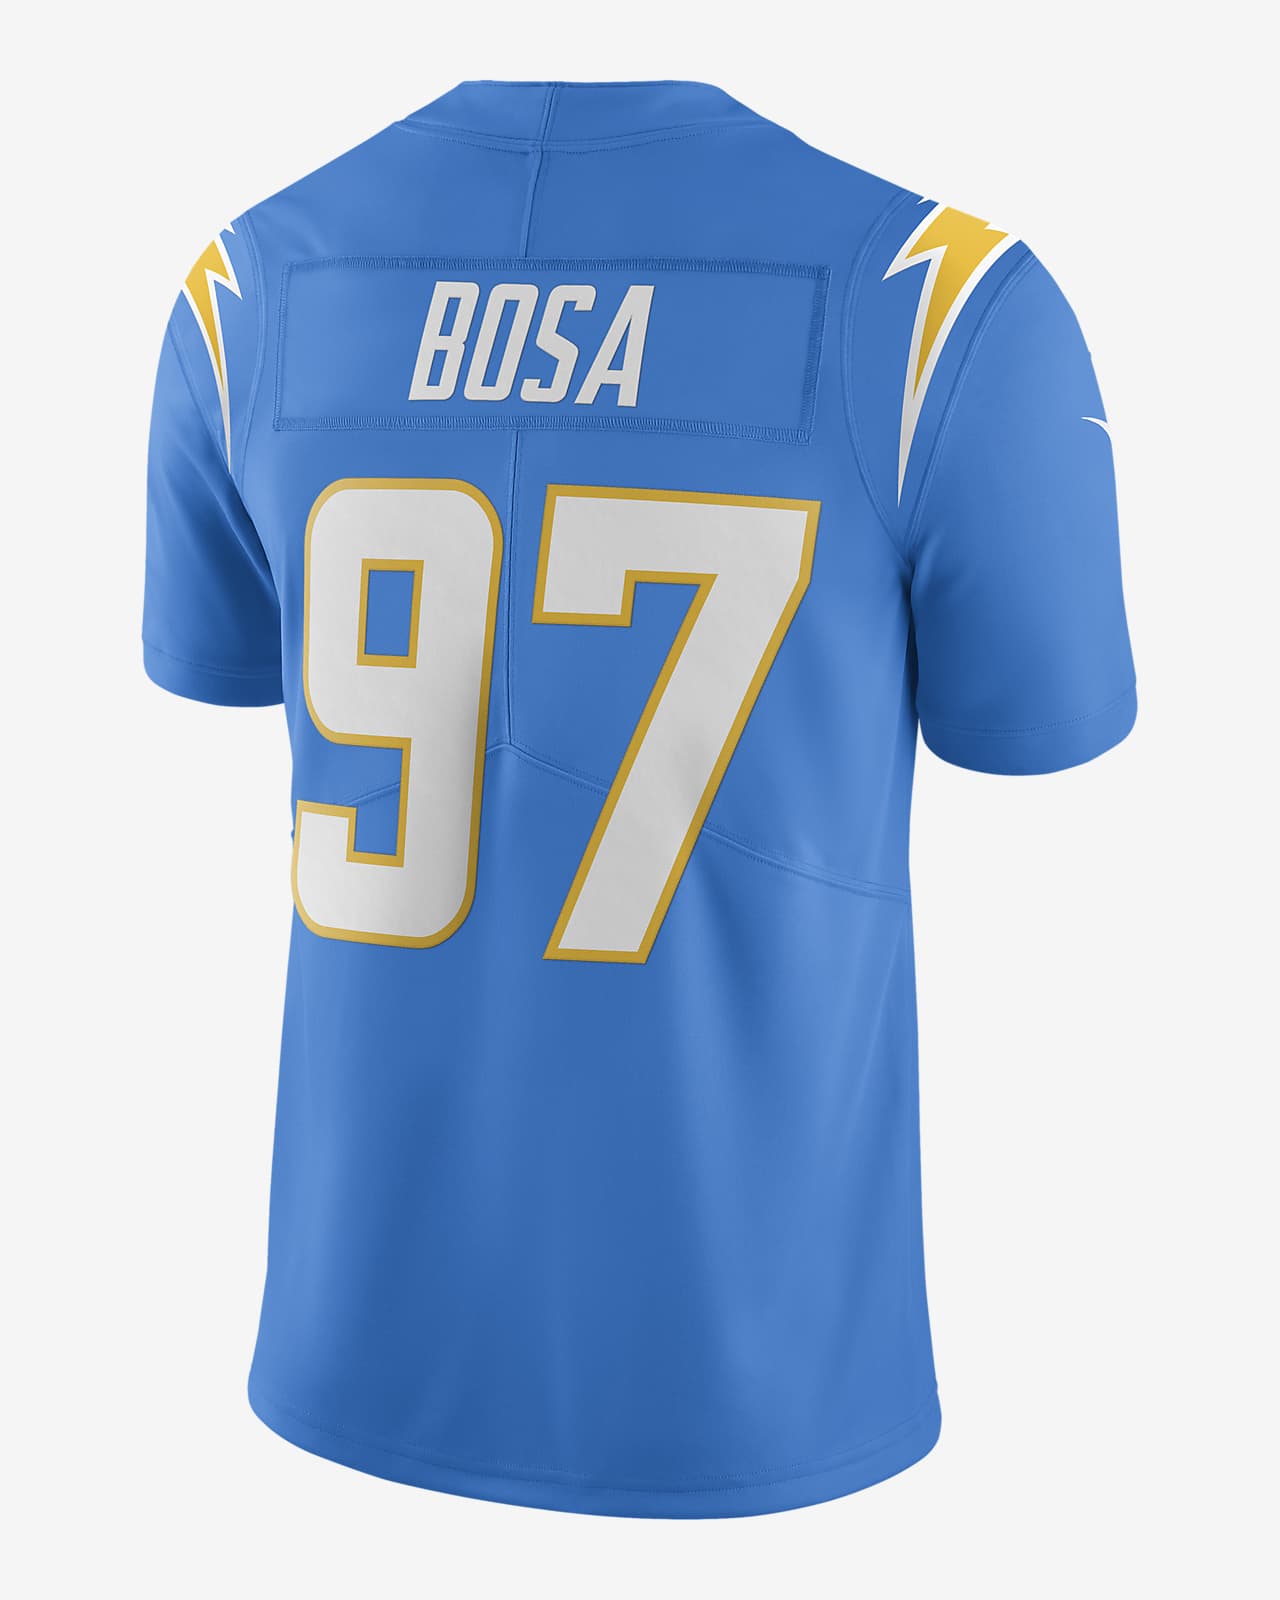 NFL Los Angeles Chargers Vapor Untouchable (Joey Bosa) Men's Limited Football Jersey